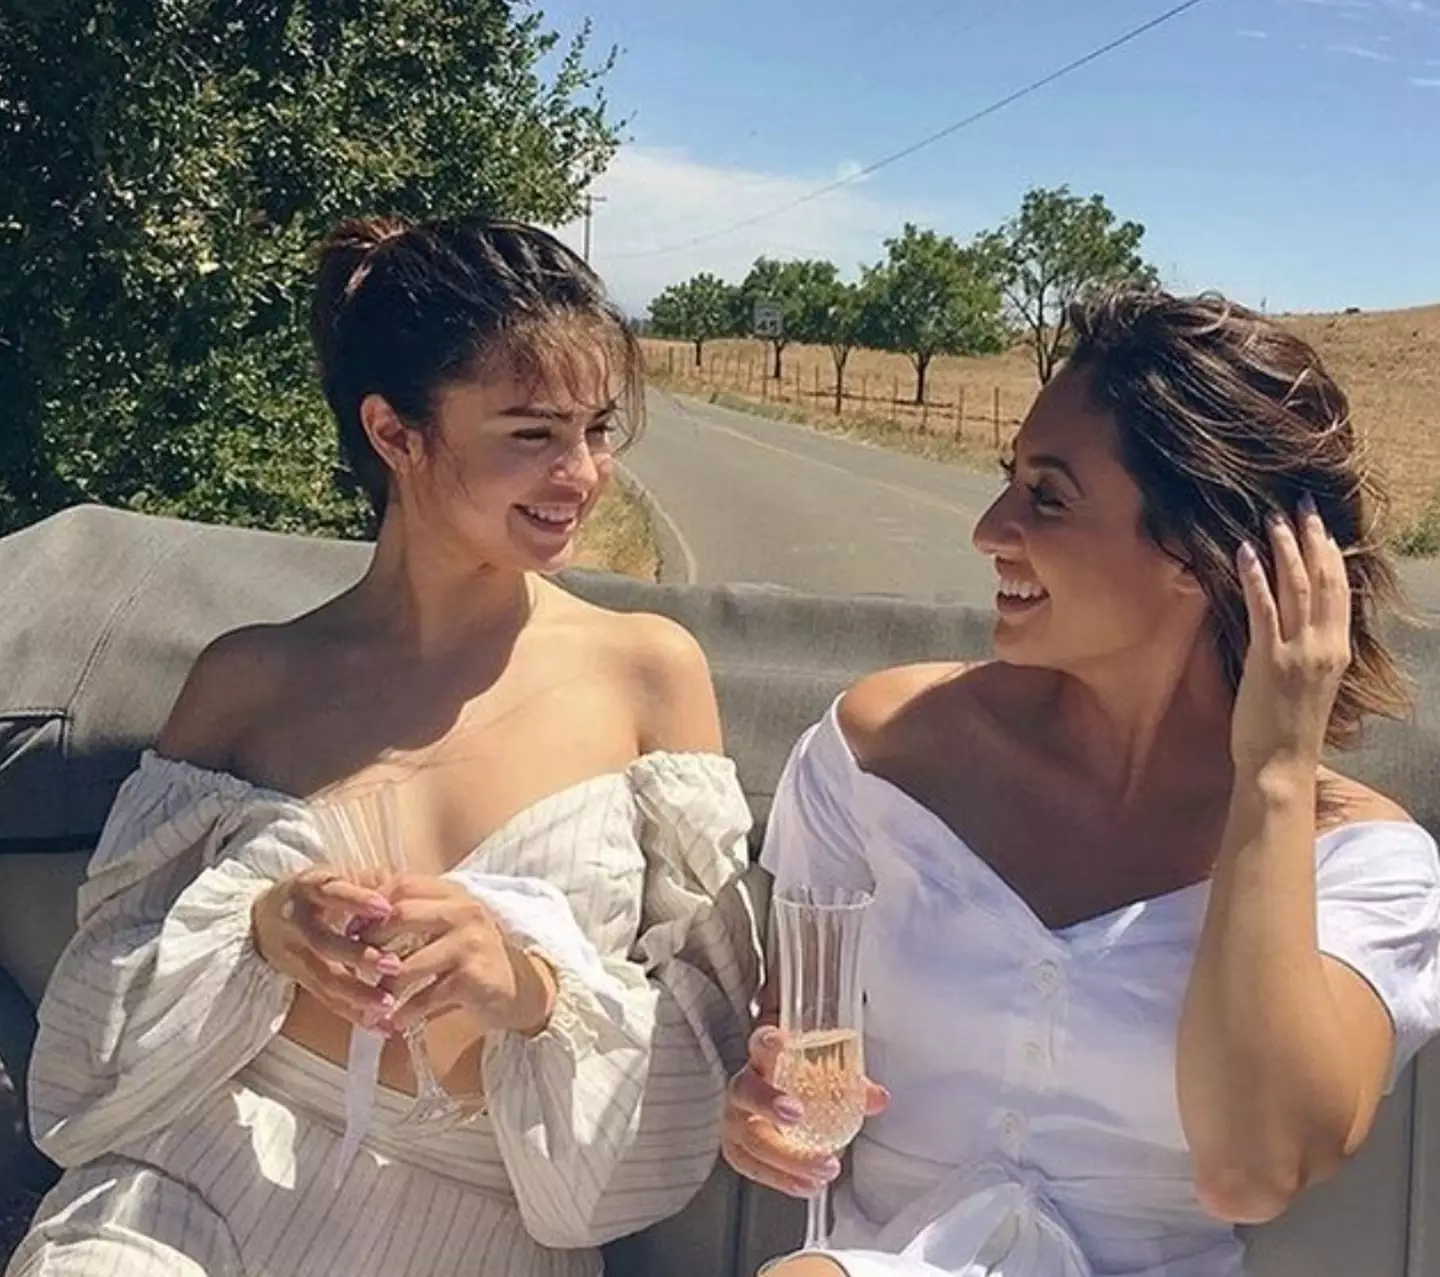 Selena shared a sweet birthday message for Francia.